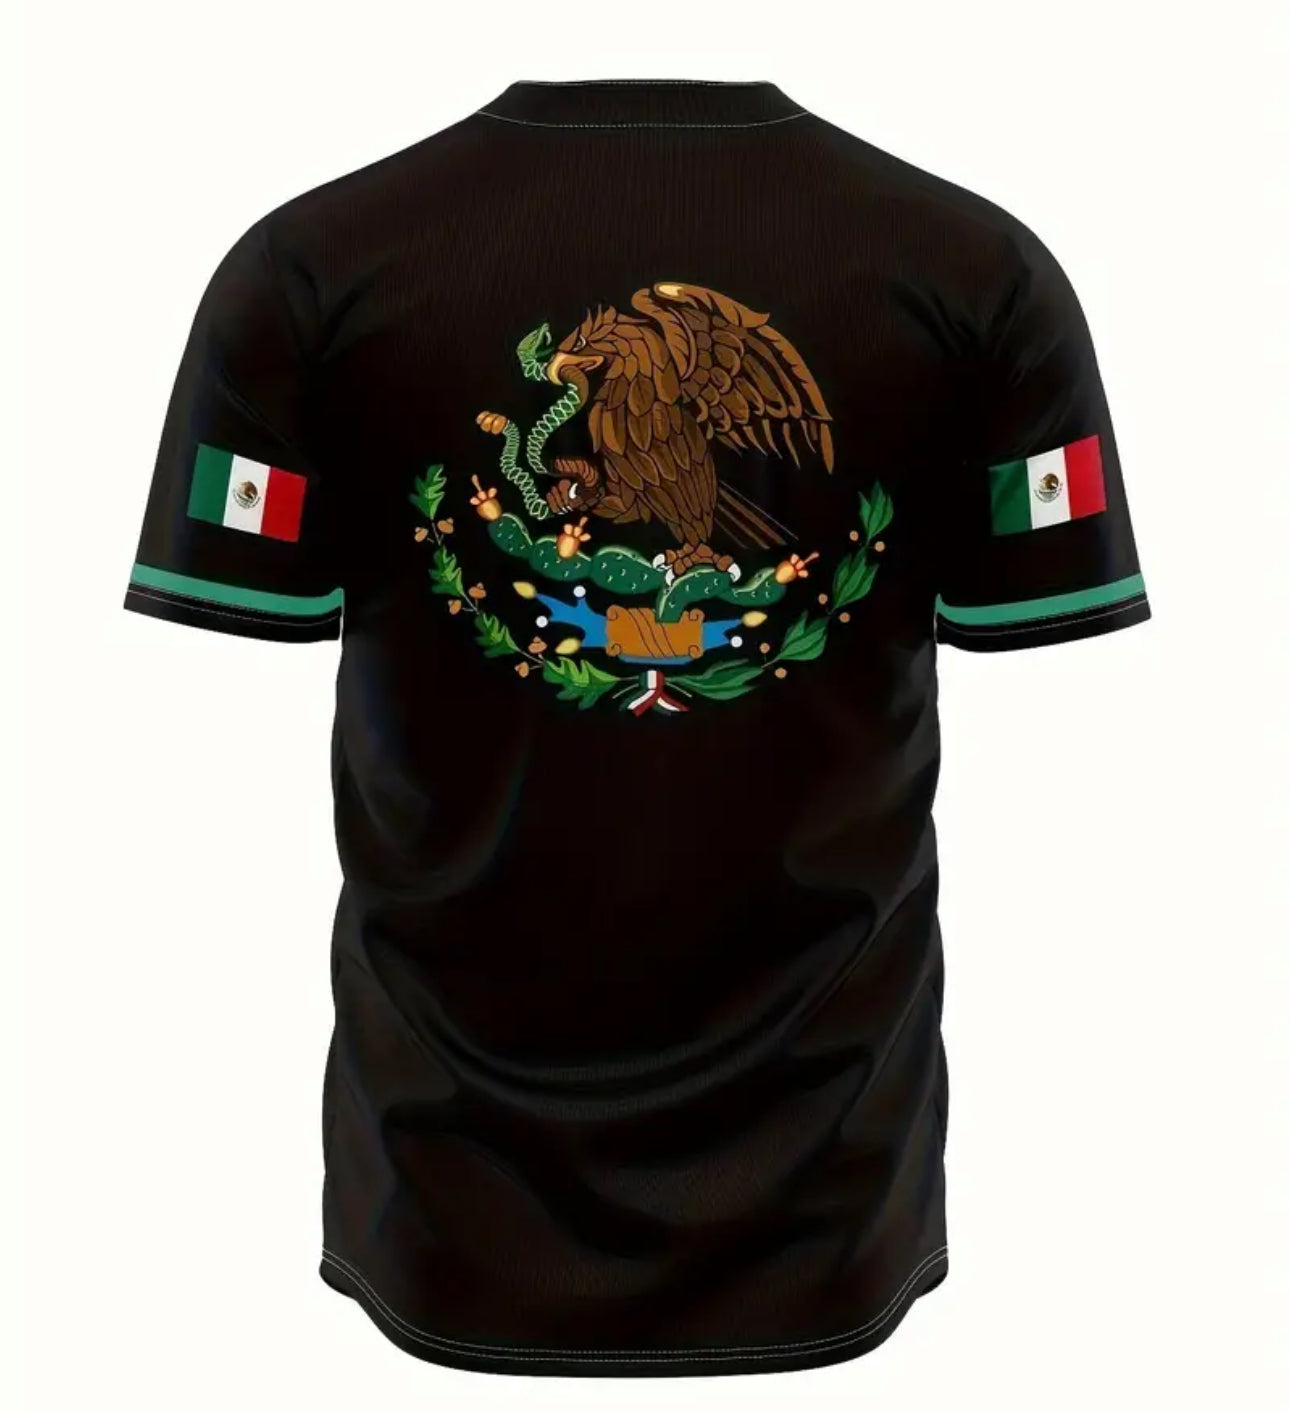 Mexico jersey